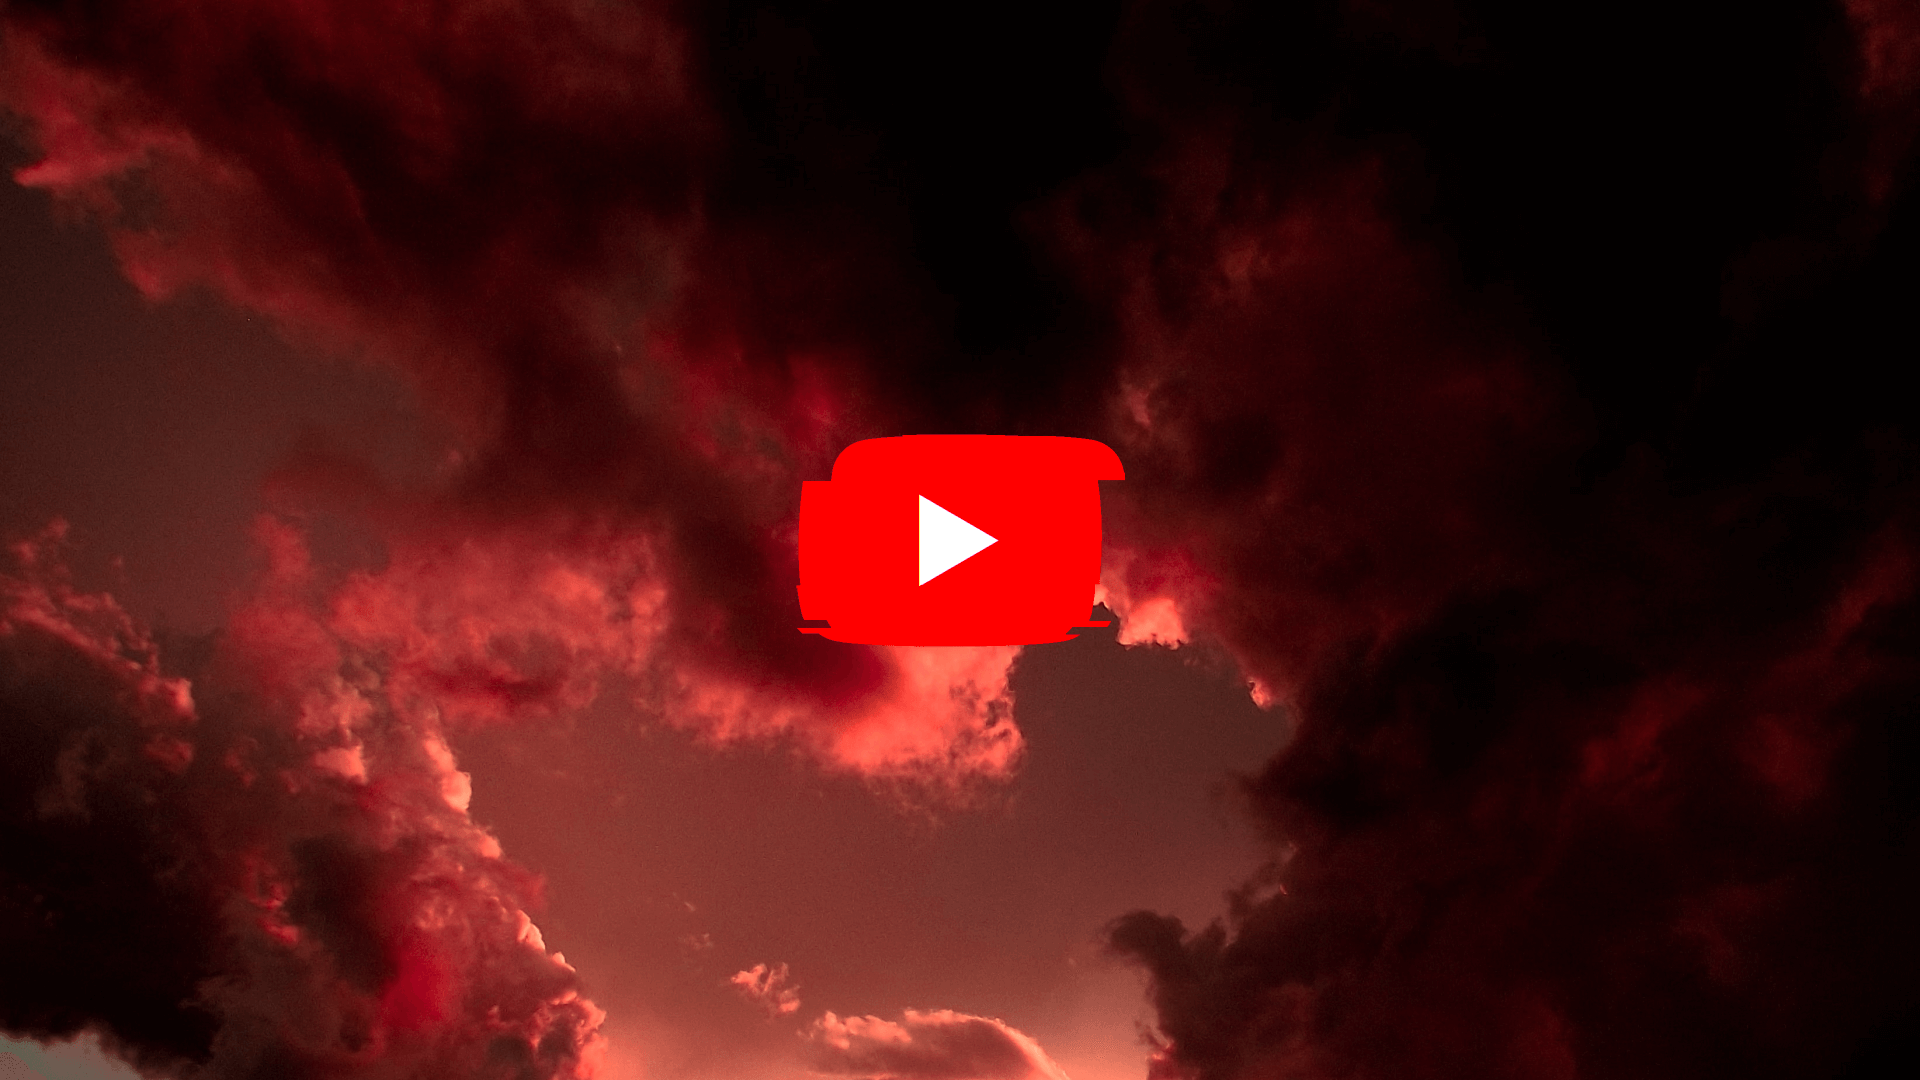 Dark red clouds with a corrupted YouTube logo